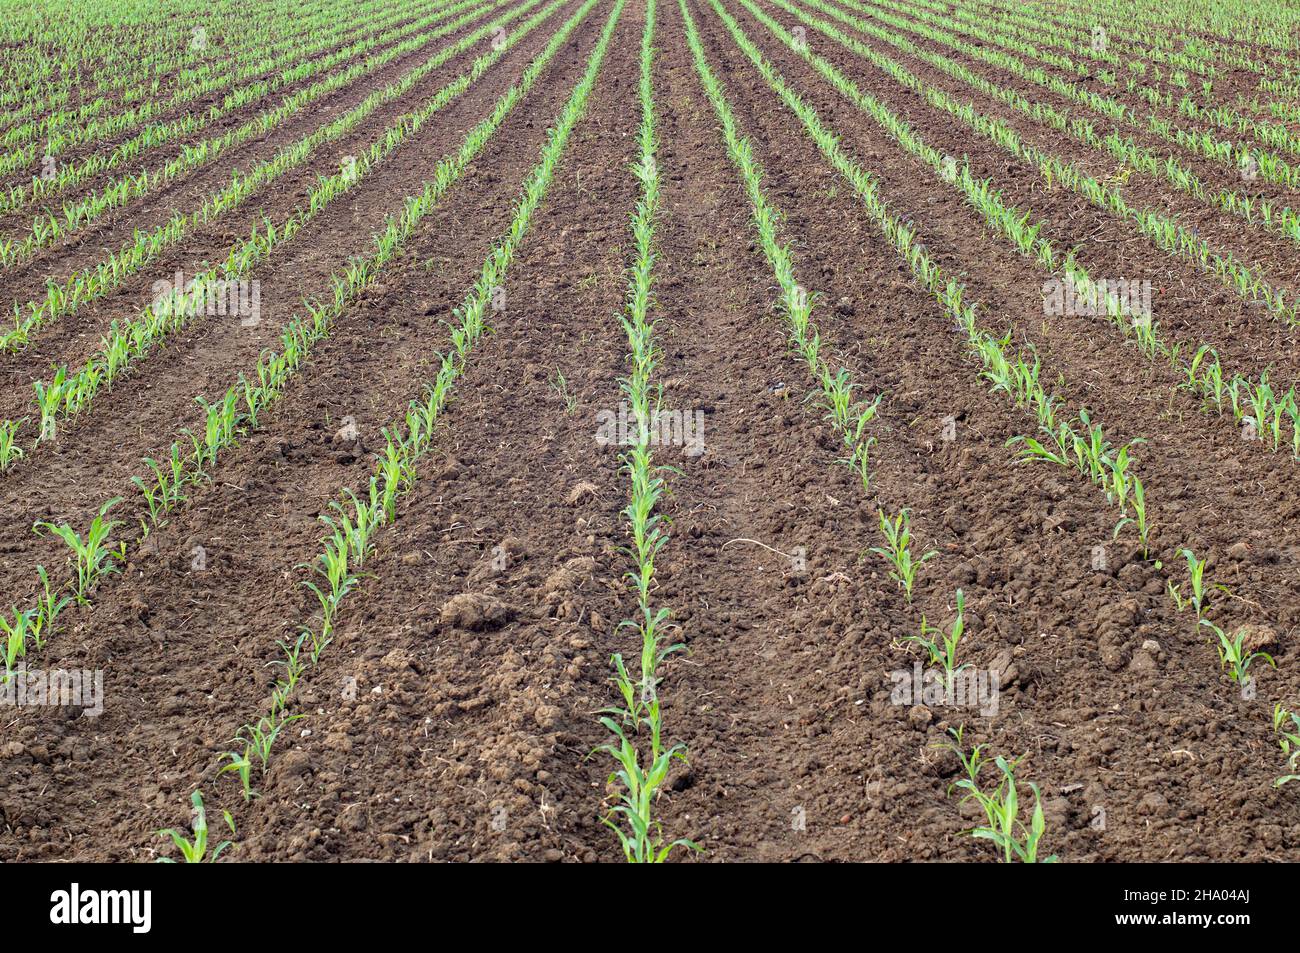 Young corn plants growing in row in a field Stock Photo